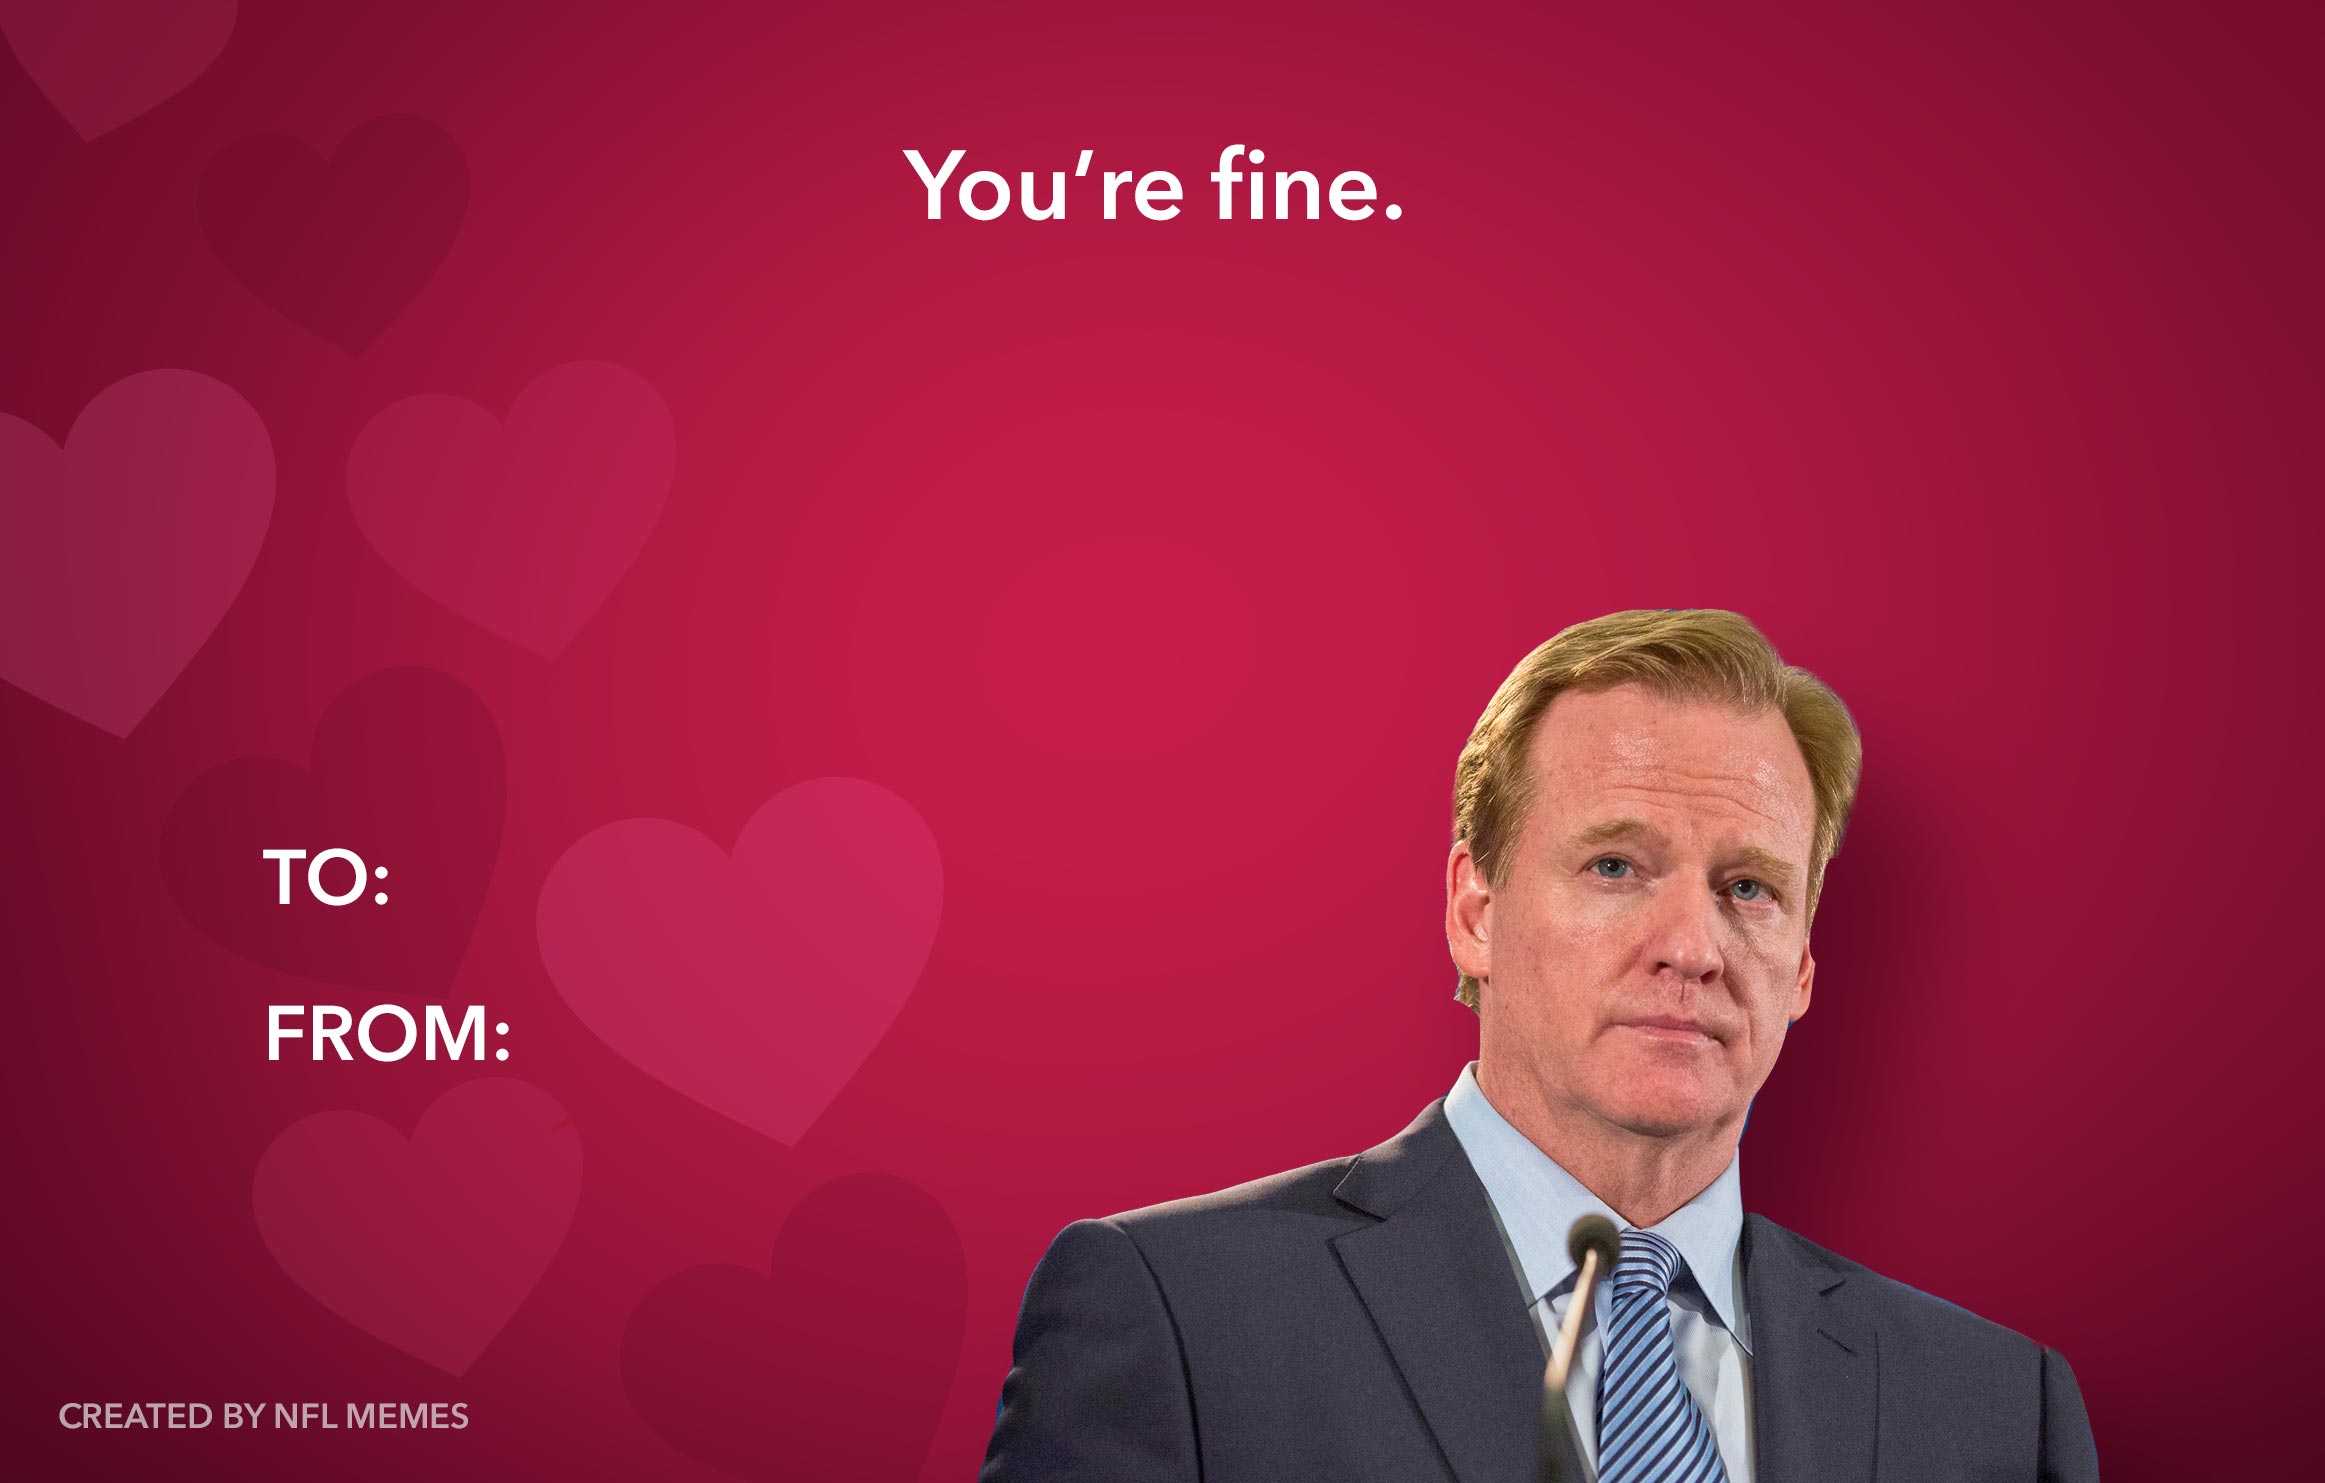 Here’s This Year’s Batch Of Hilarious NFL-Themed Valentine’s Day Cards (PICS)